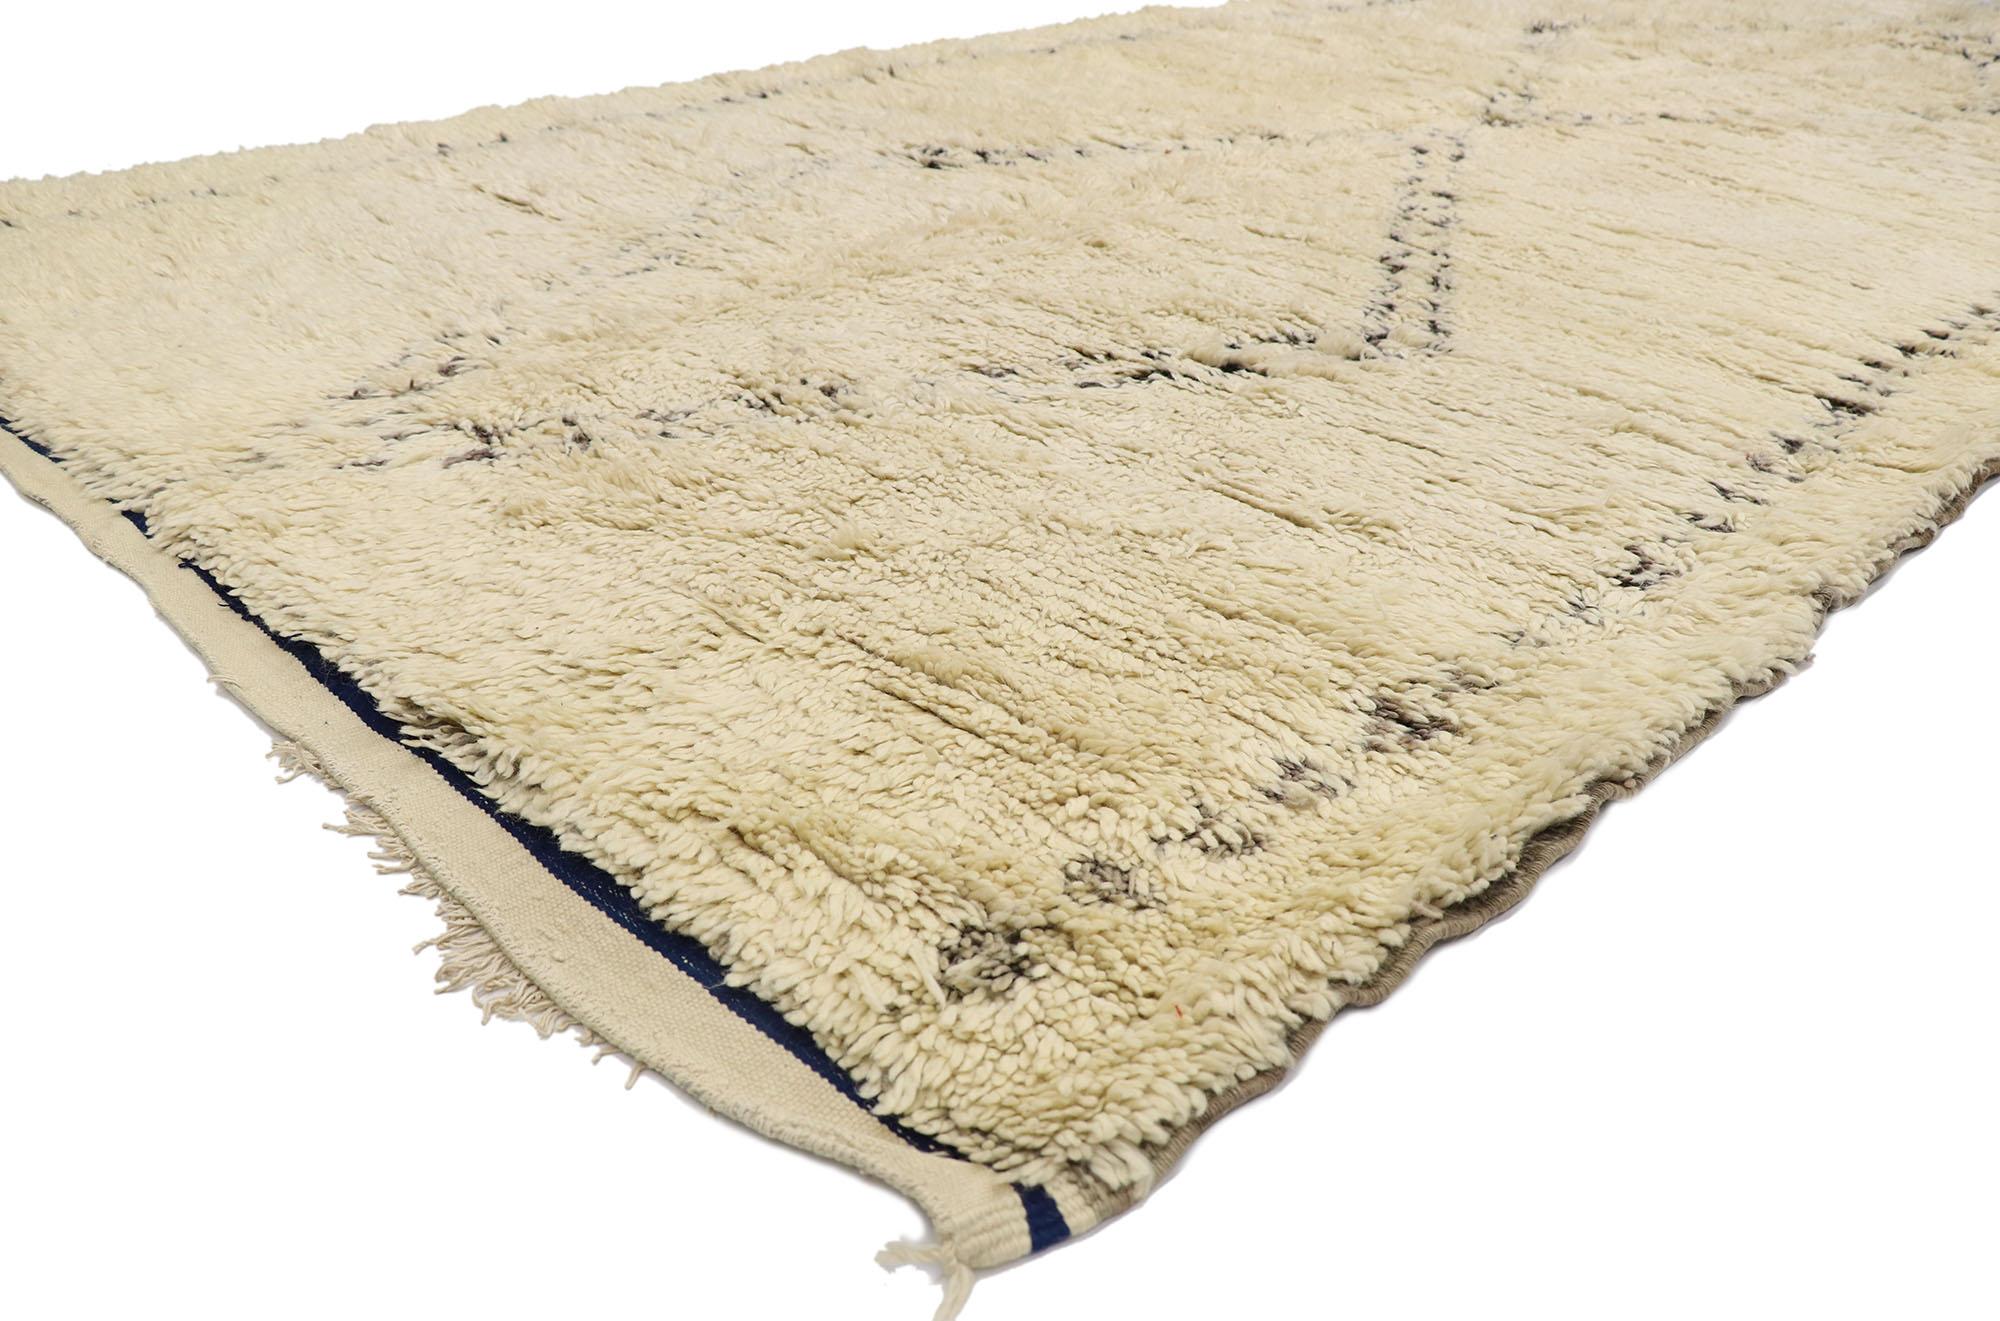 21395 Vintage Berber Beni Ourain Moroccan rug with Mid-Century Modern Style 06'07 x 13'08. With its simplicity, plush pile and Mid-Century Modern style, this hand knotted wool vintage Beni Ourain Moroccan rug provides a feeling of cozy contentment